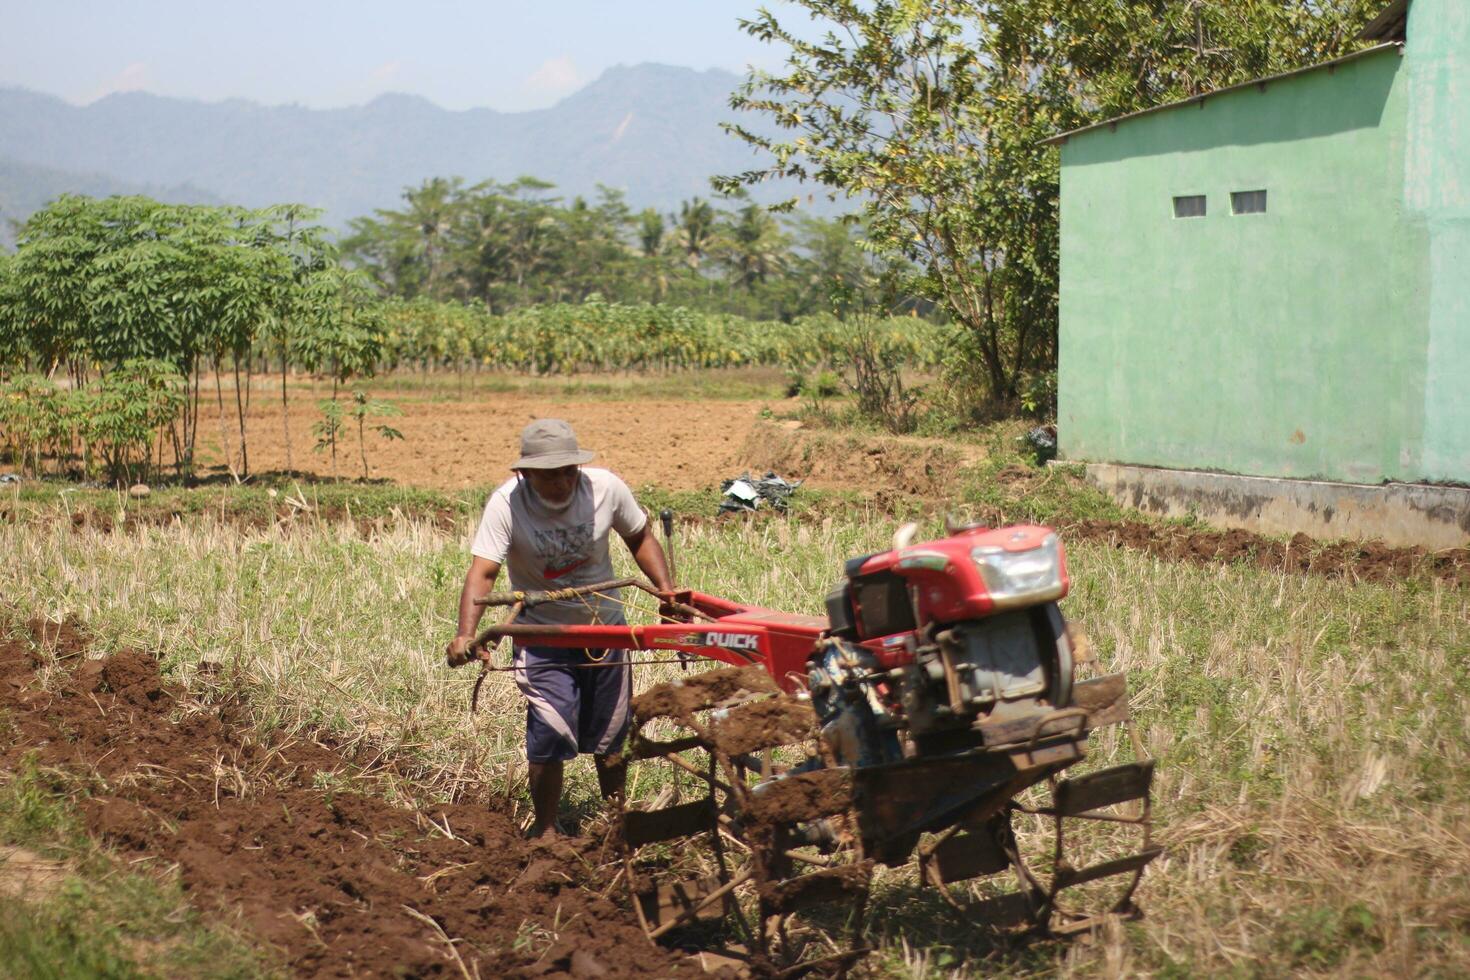 Magelang Indonesia.07302023-a farmer is plowing a field with a modern tool in the form of a tractor. photo